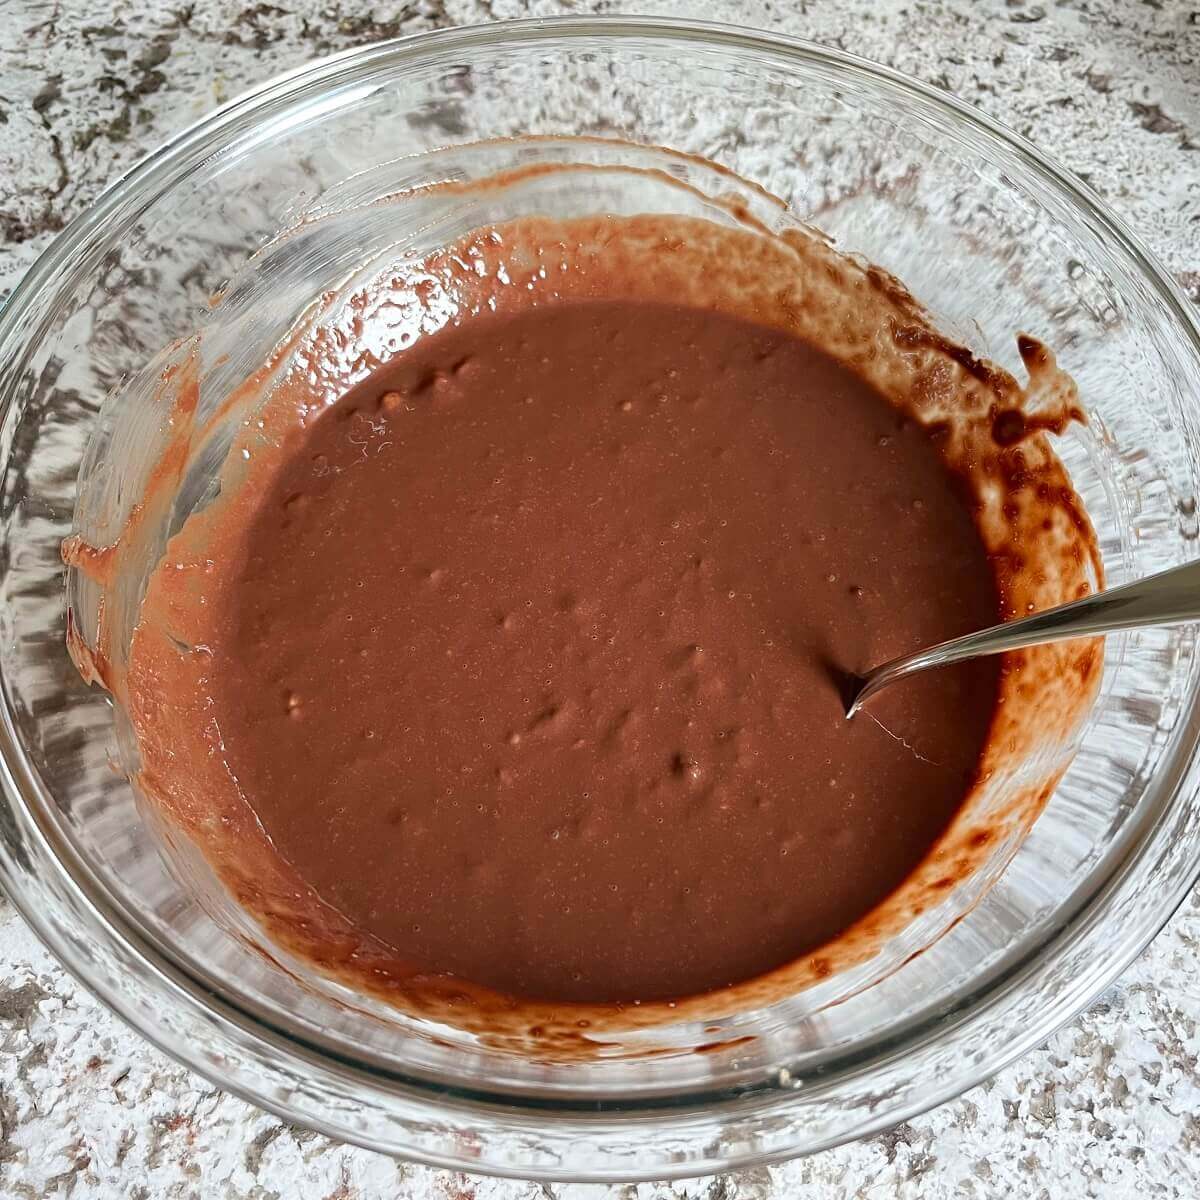 Wet ingredients for brownie batter in a glass mixing bowl.